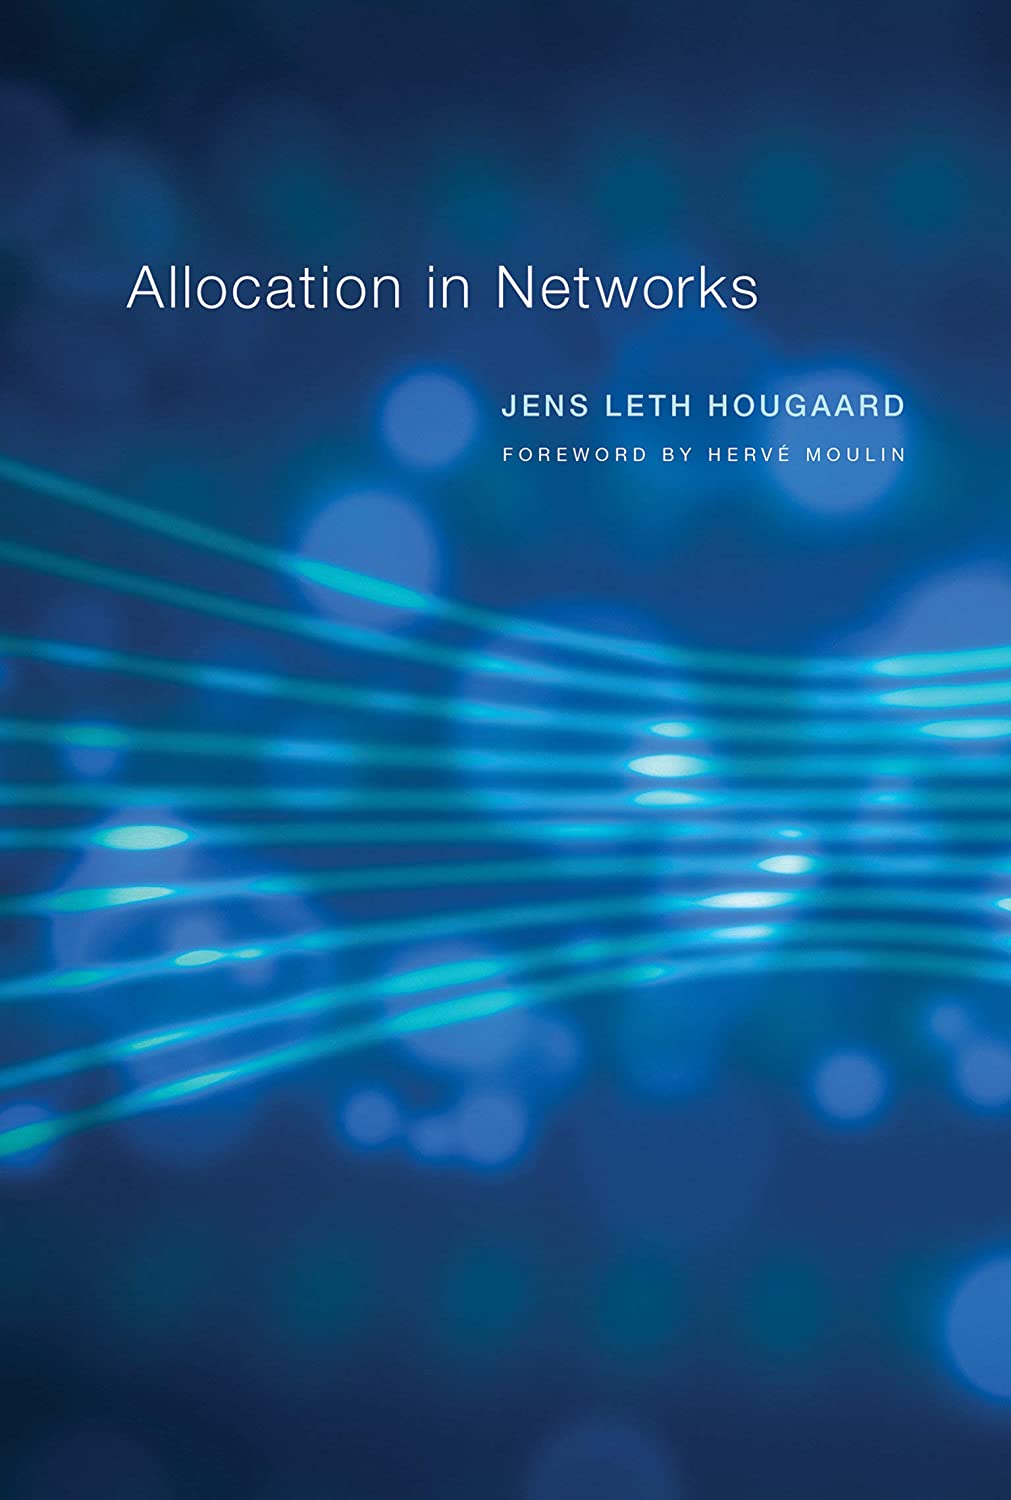 Allocation in Networks (The MIT Press)